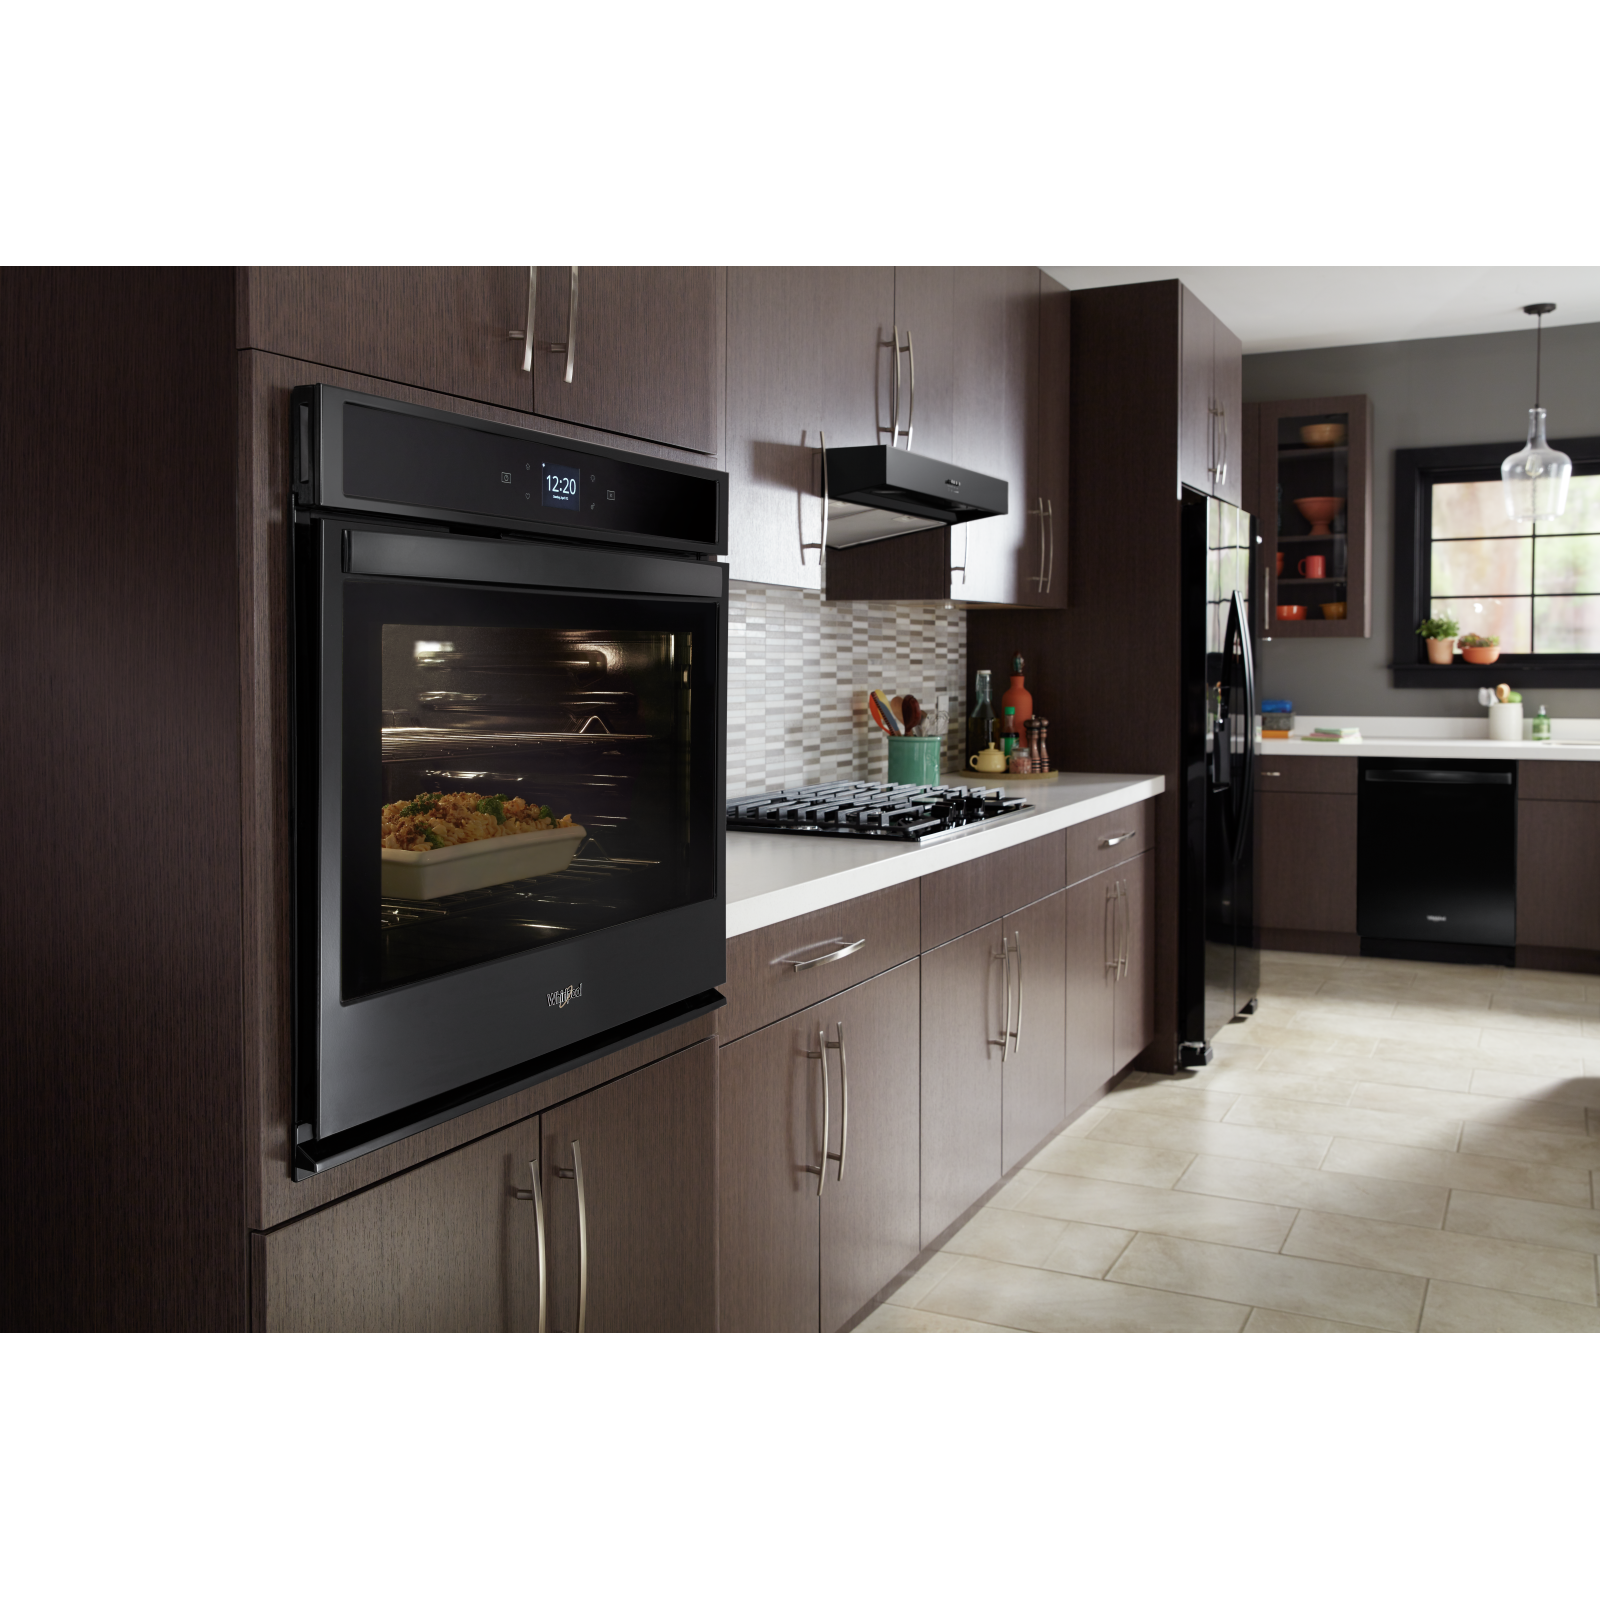 Whirlpool - 4.3 cu. ft Single Wall Oven in Black - WOS51EC7HB